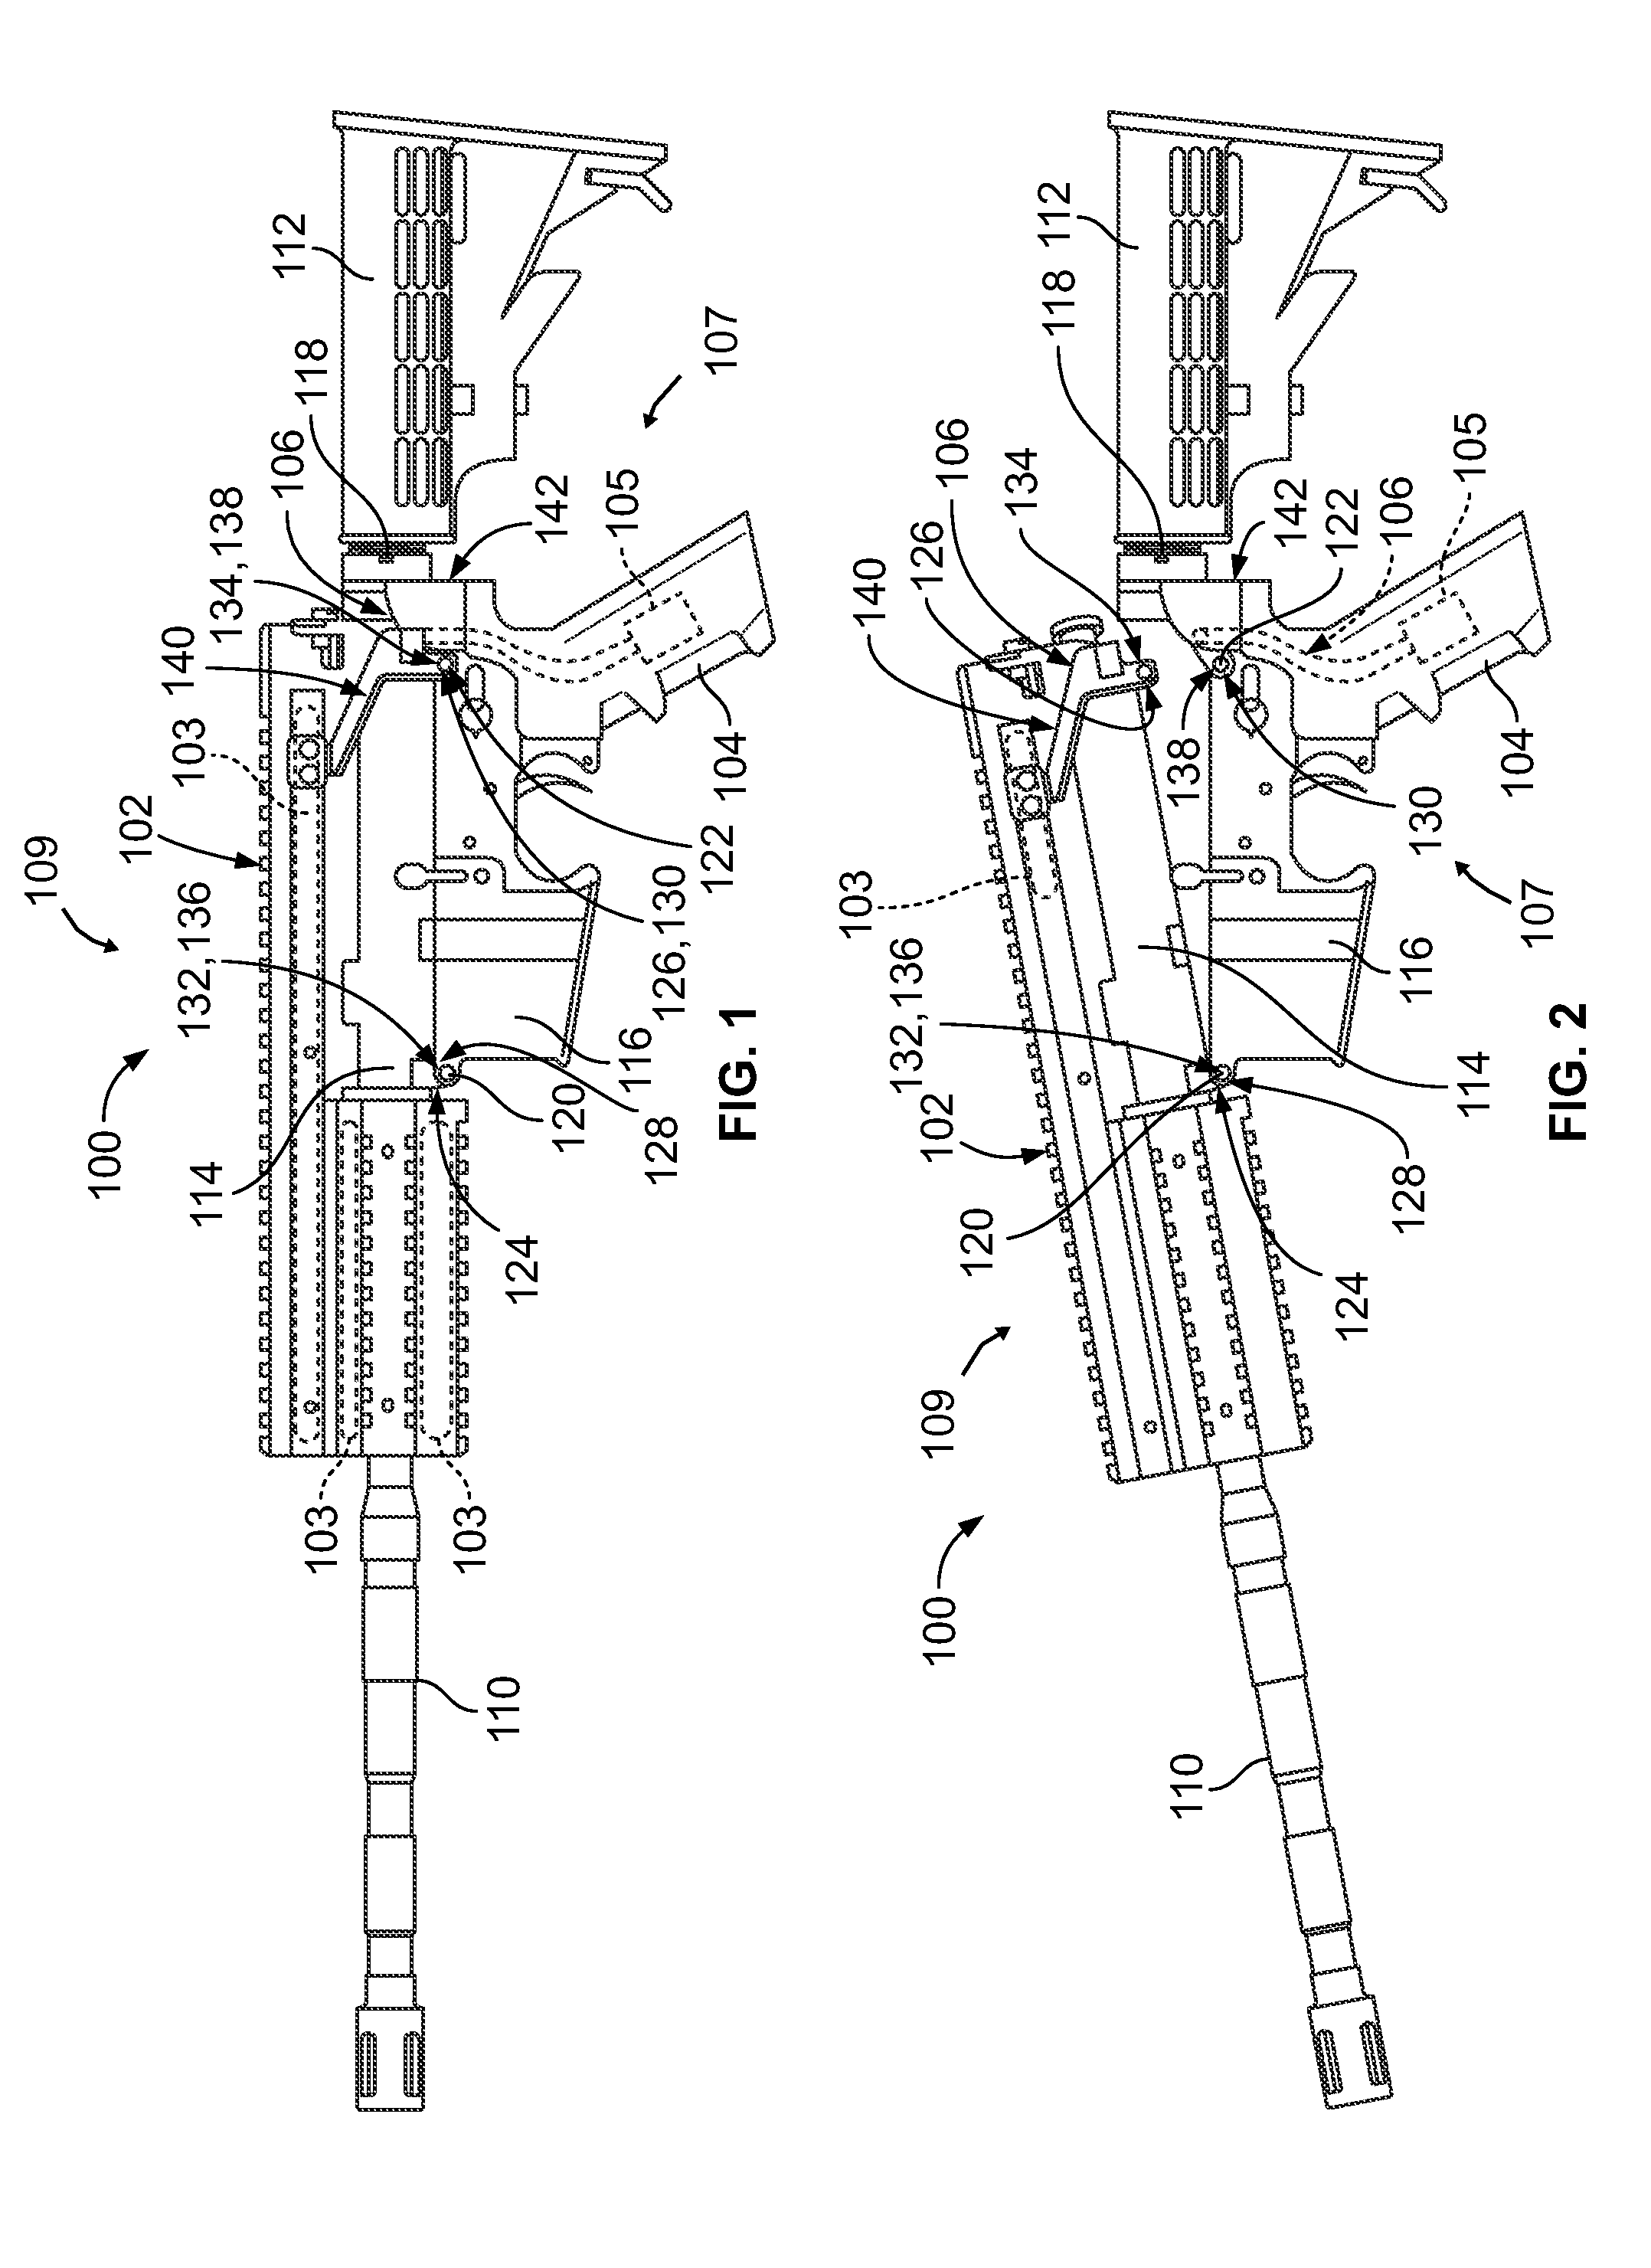 Communication connector system for a weapon